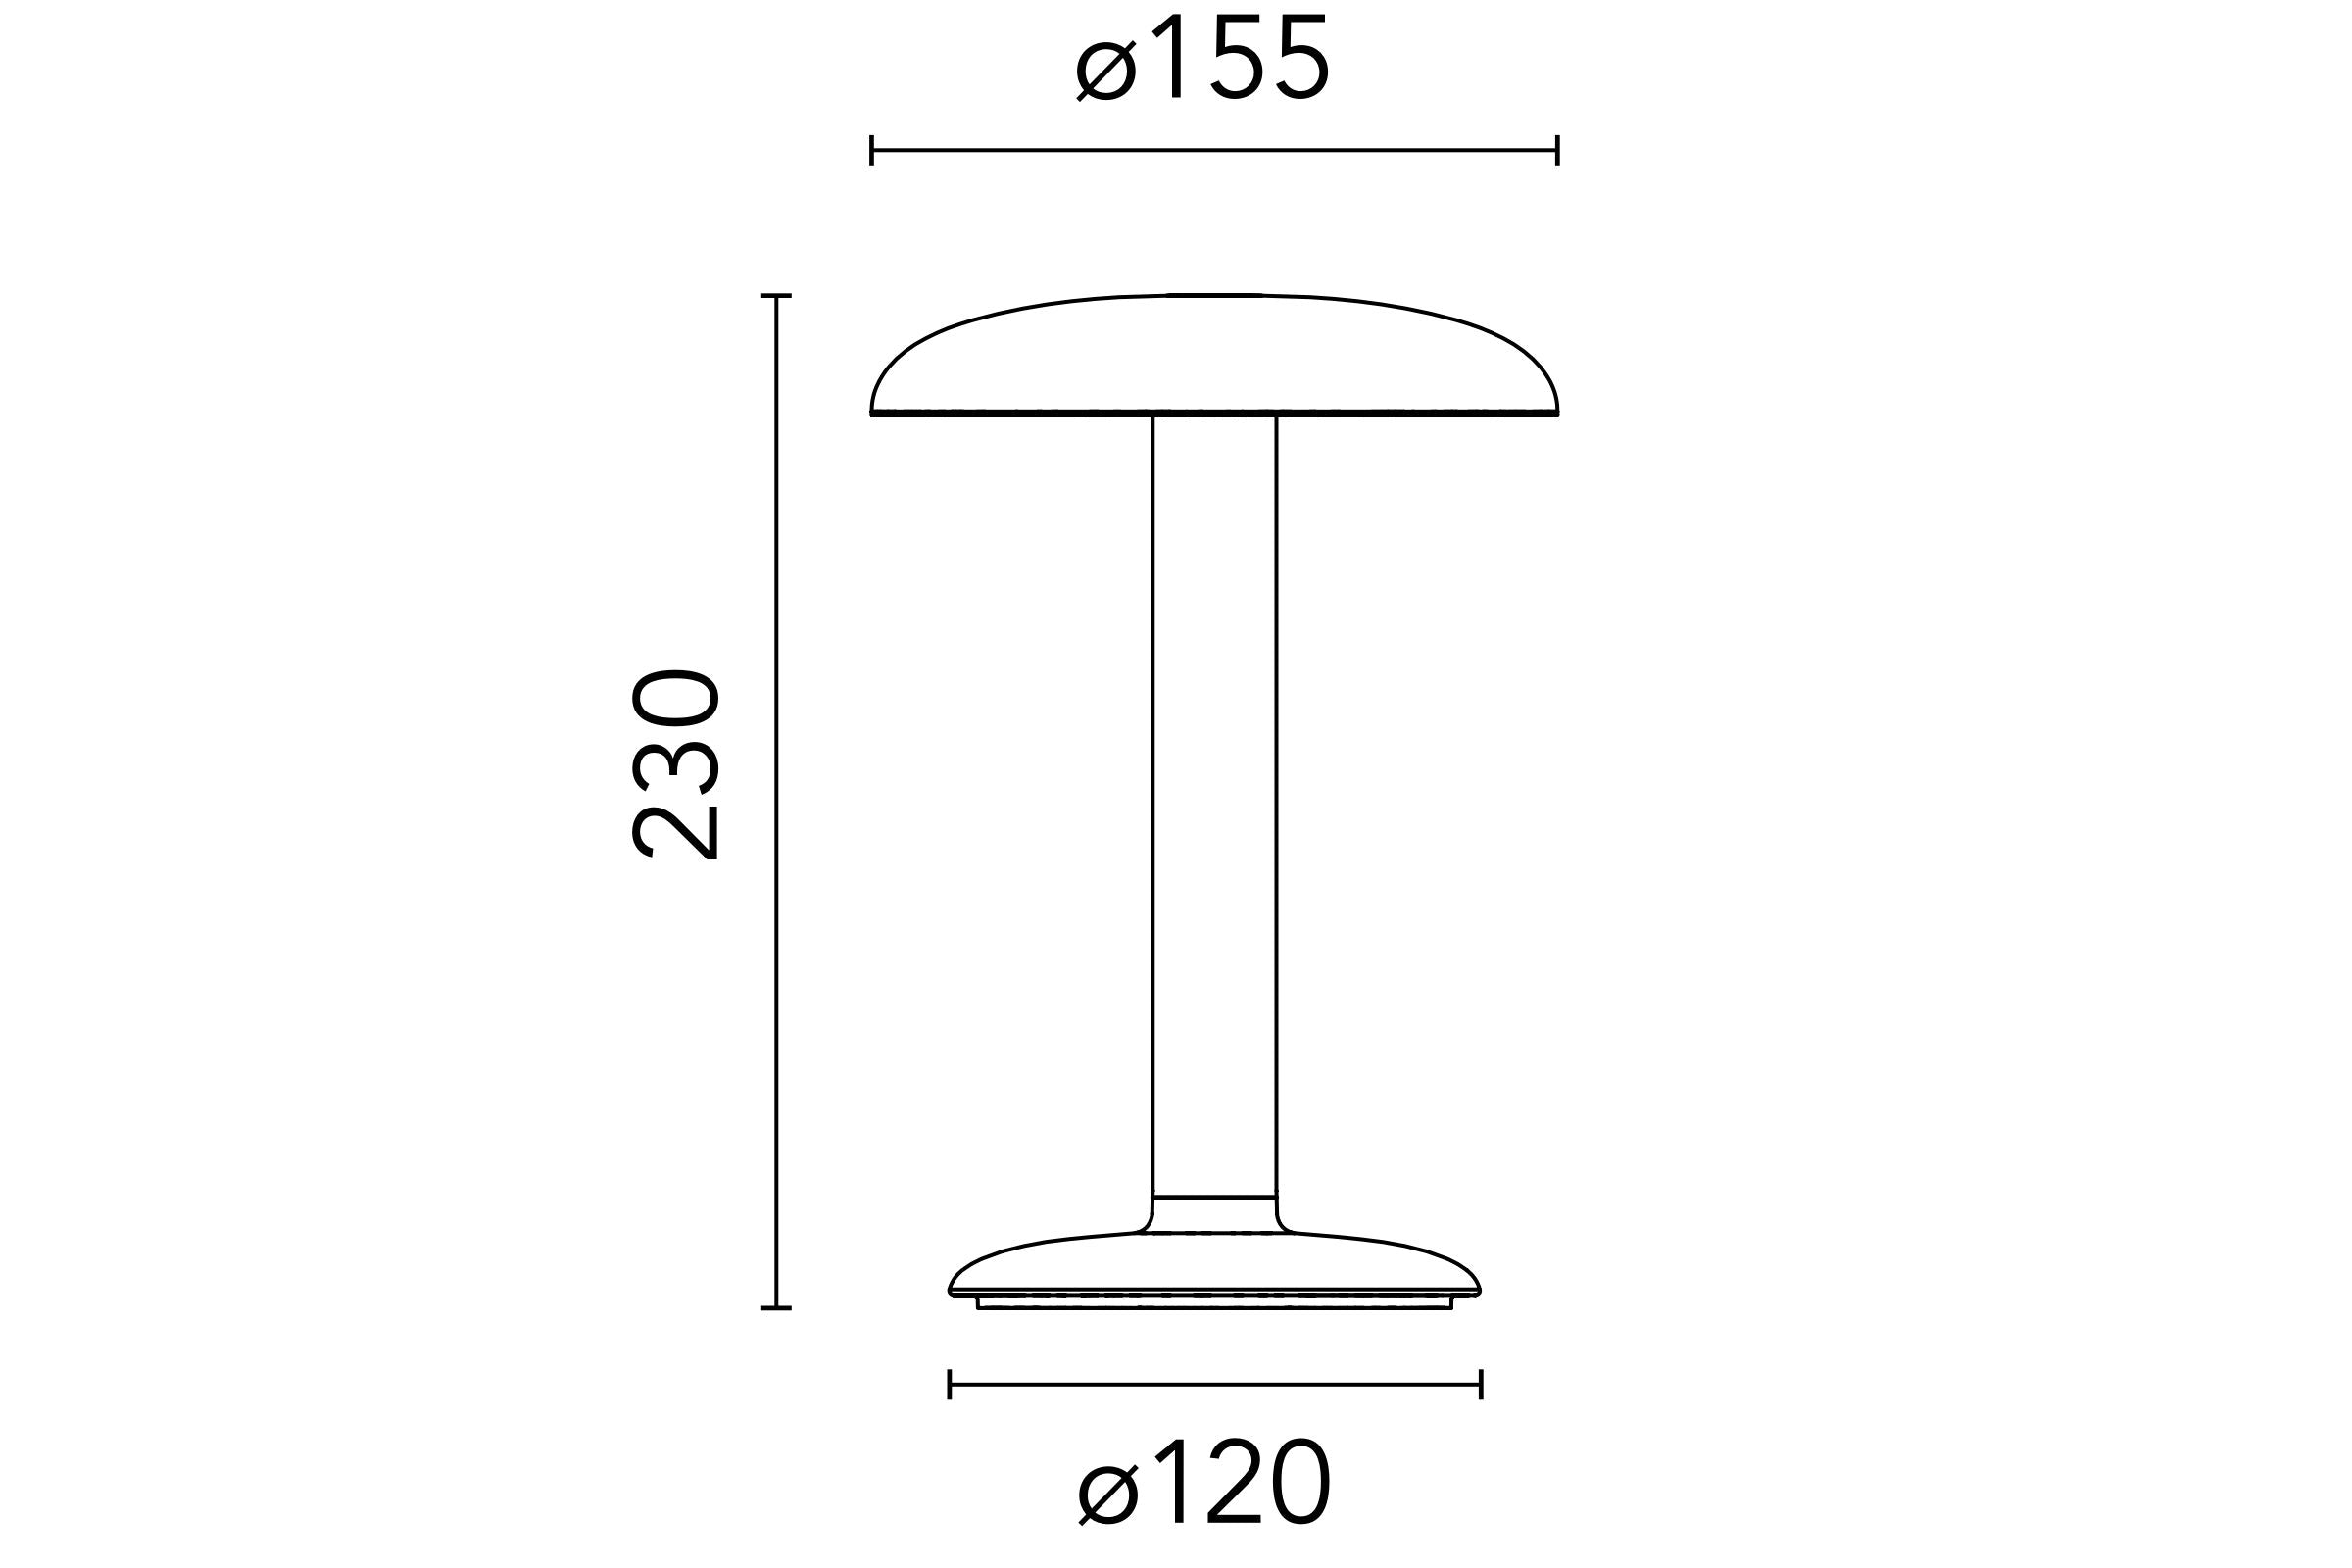 Flos Gustave Table Lamp 2700 K, Polished Silver